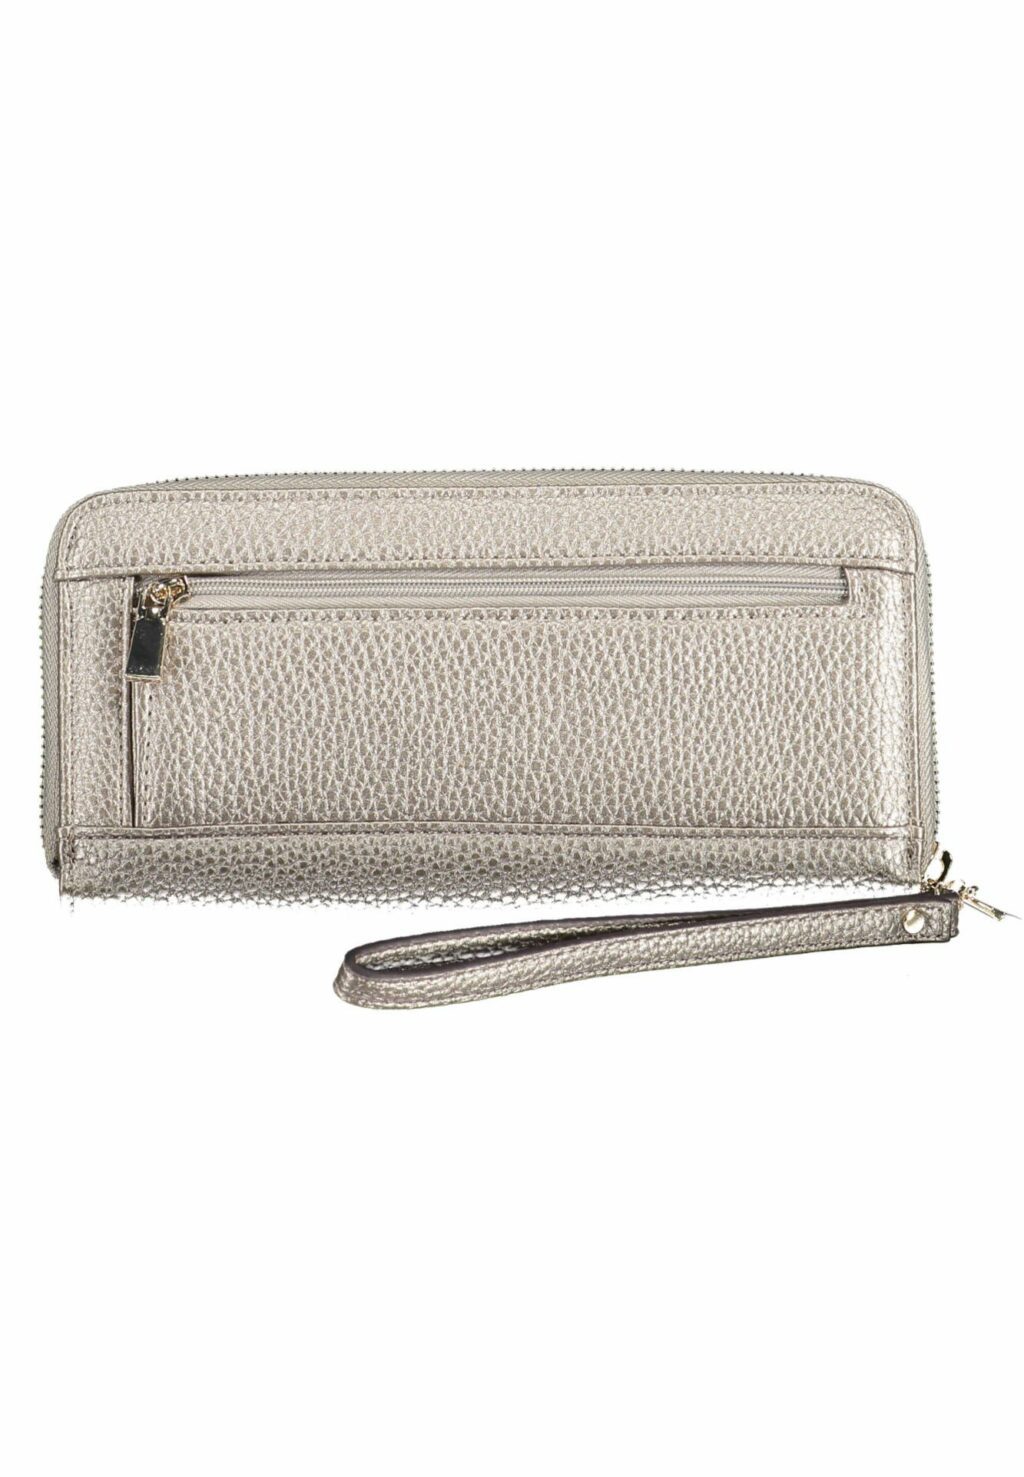 GUESS JEANS WOMEN'S WALLET SILVER EVG839046_ARGENTO_PEWTER